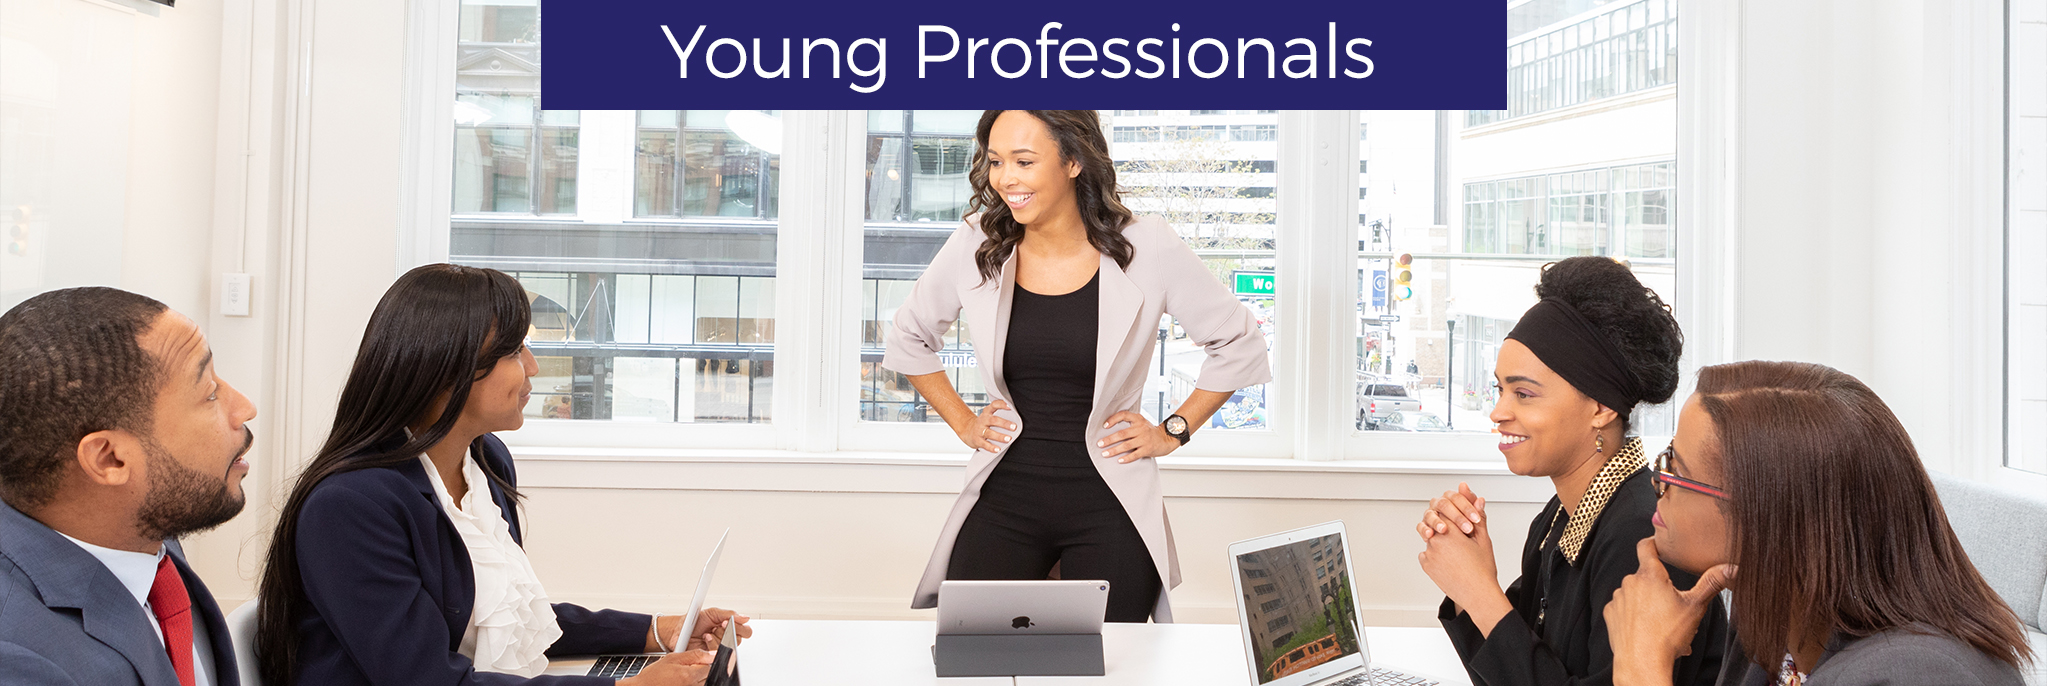 young_professionals_bn